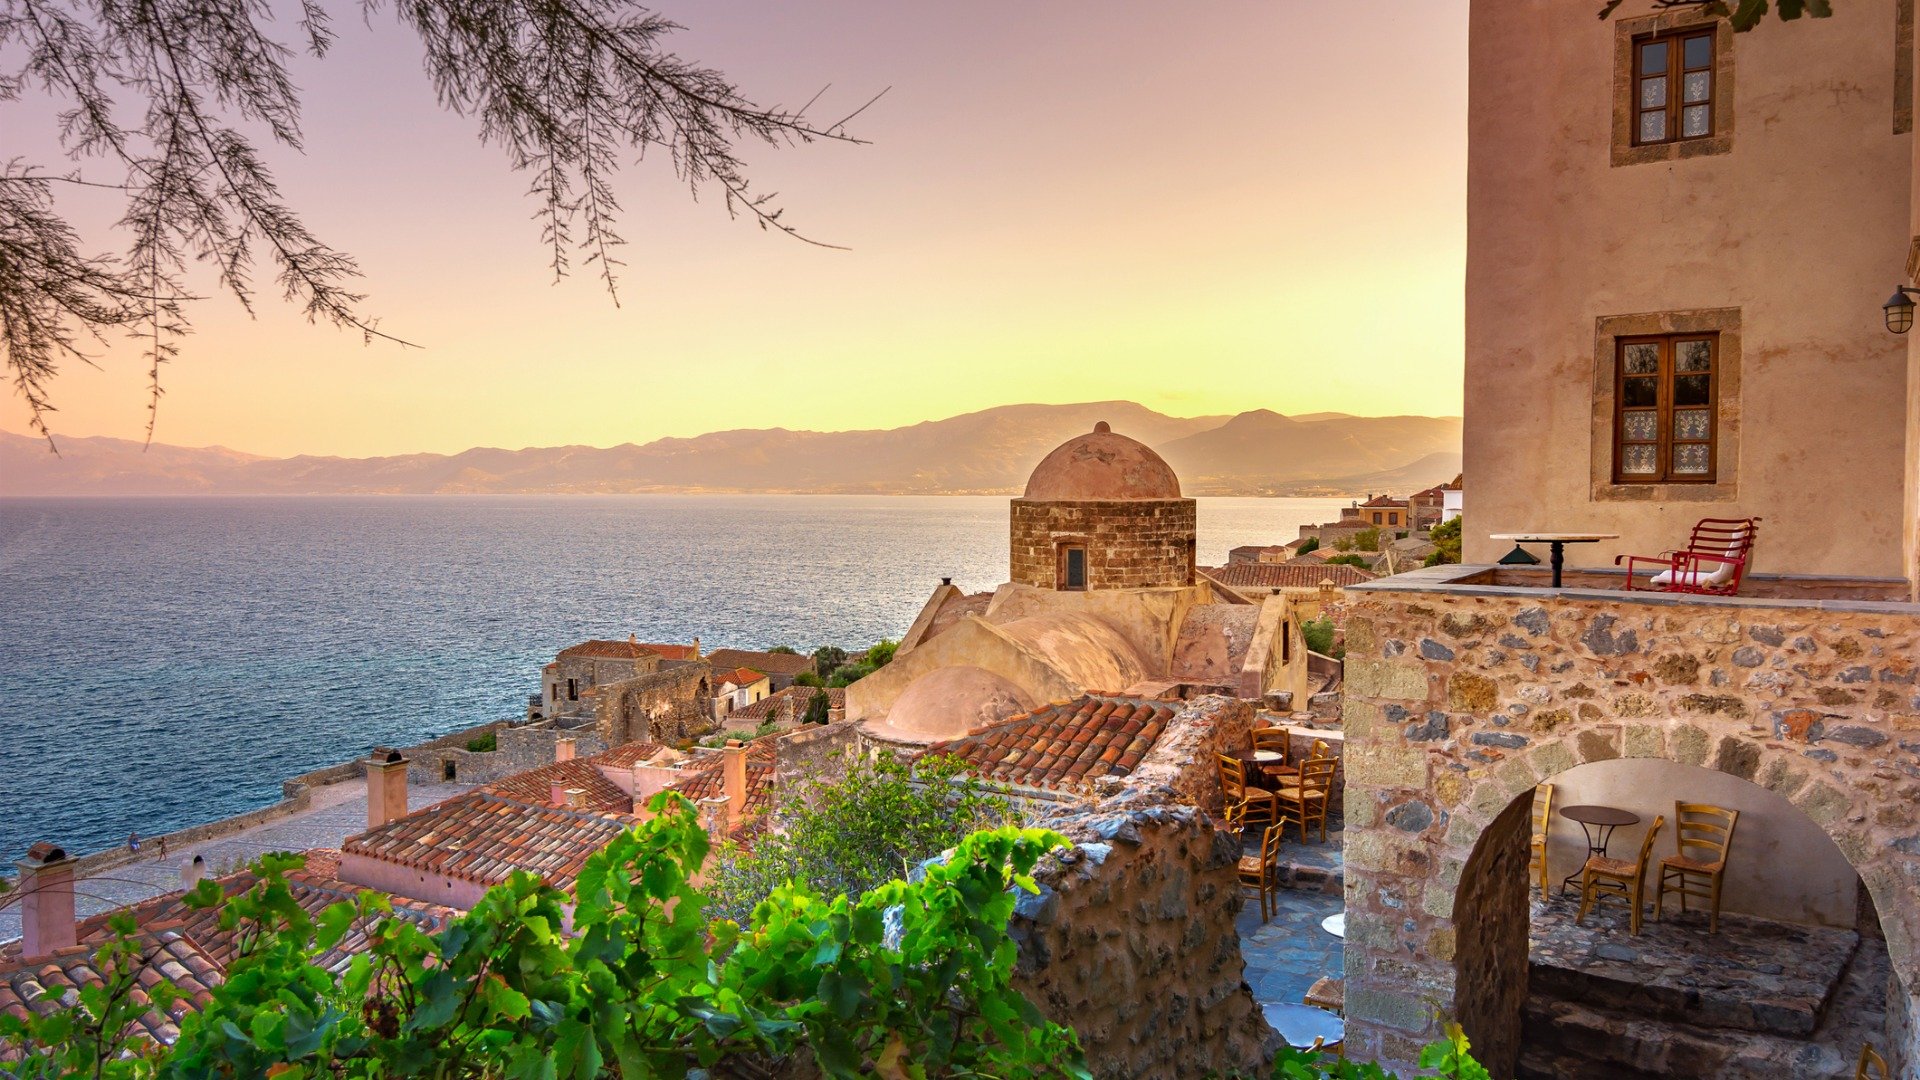 This is a view of the stone buildings of Monemvasia with the sea in the background. 